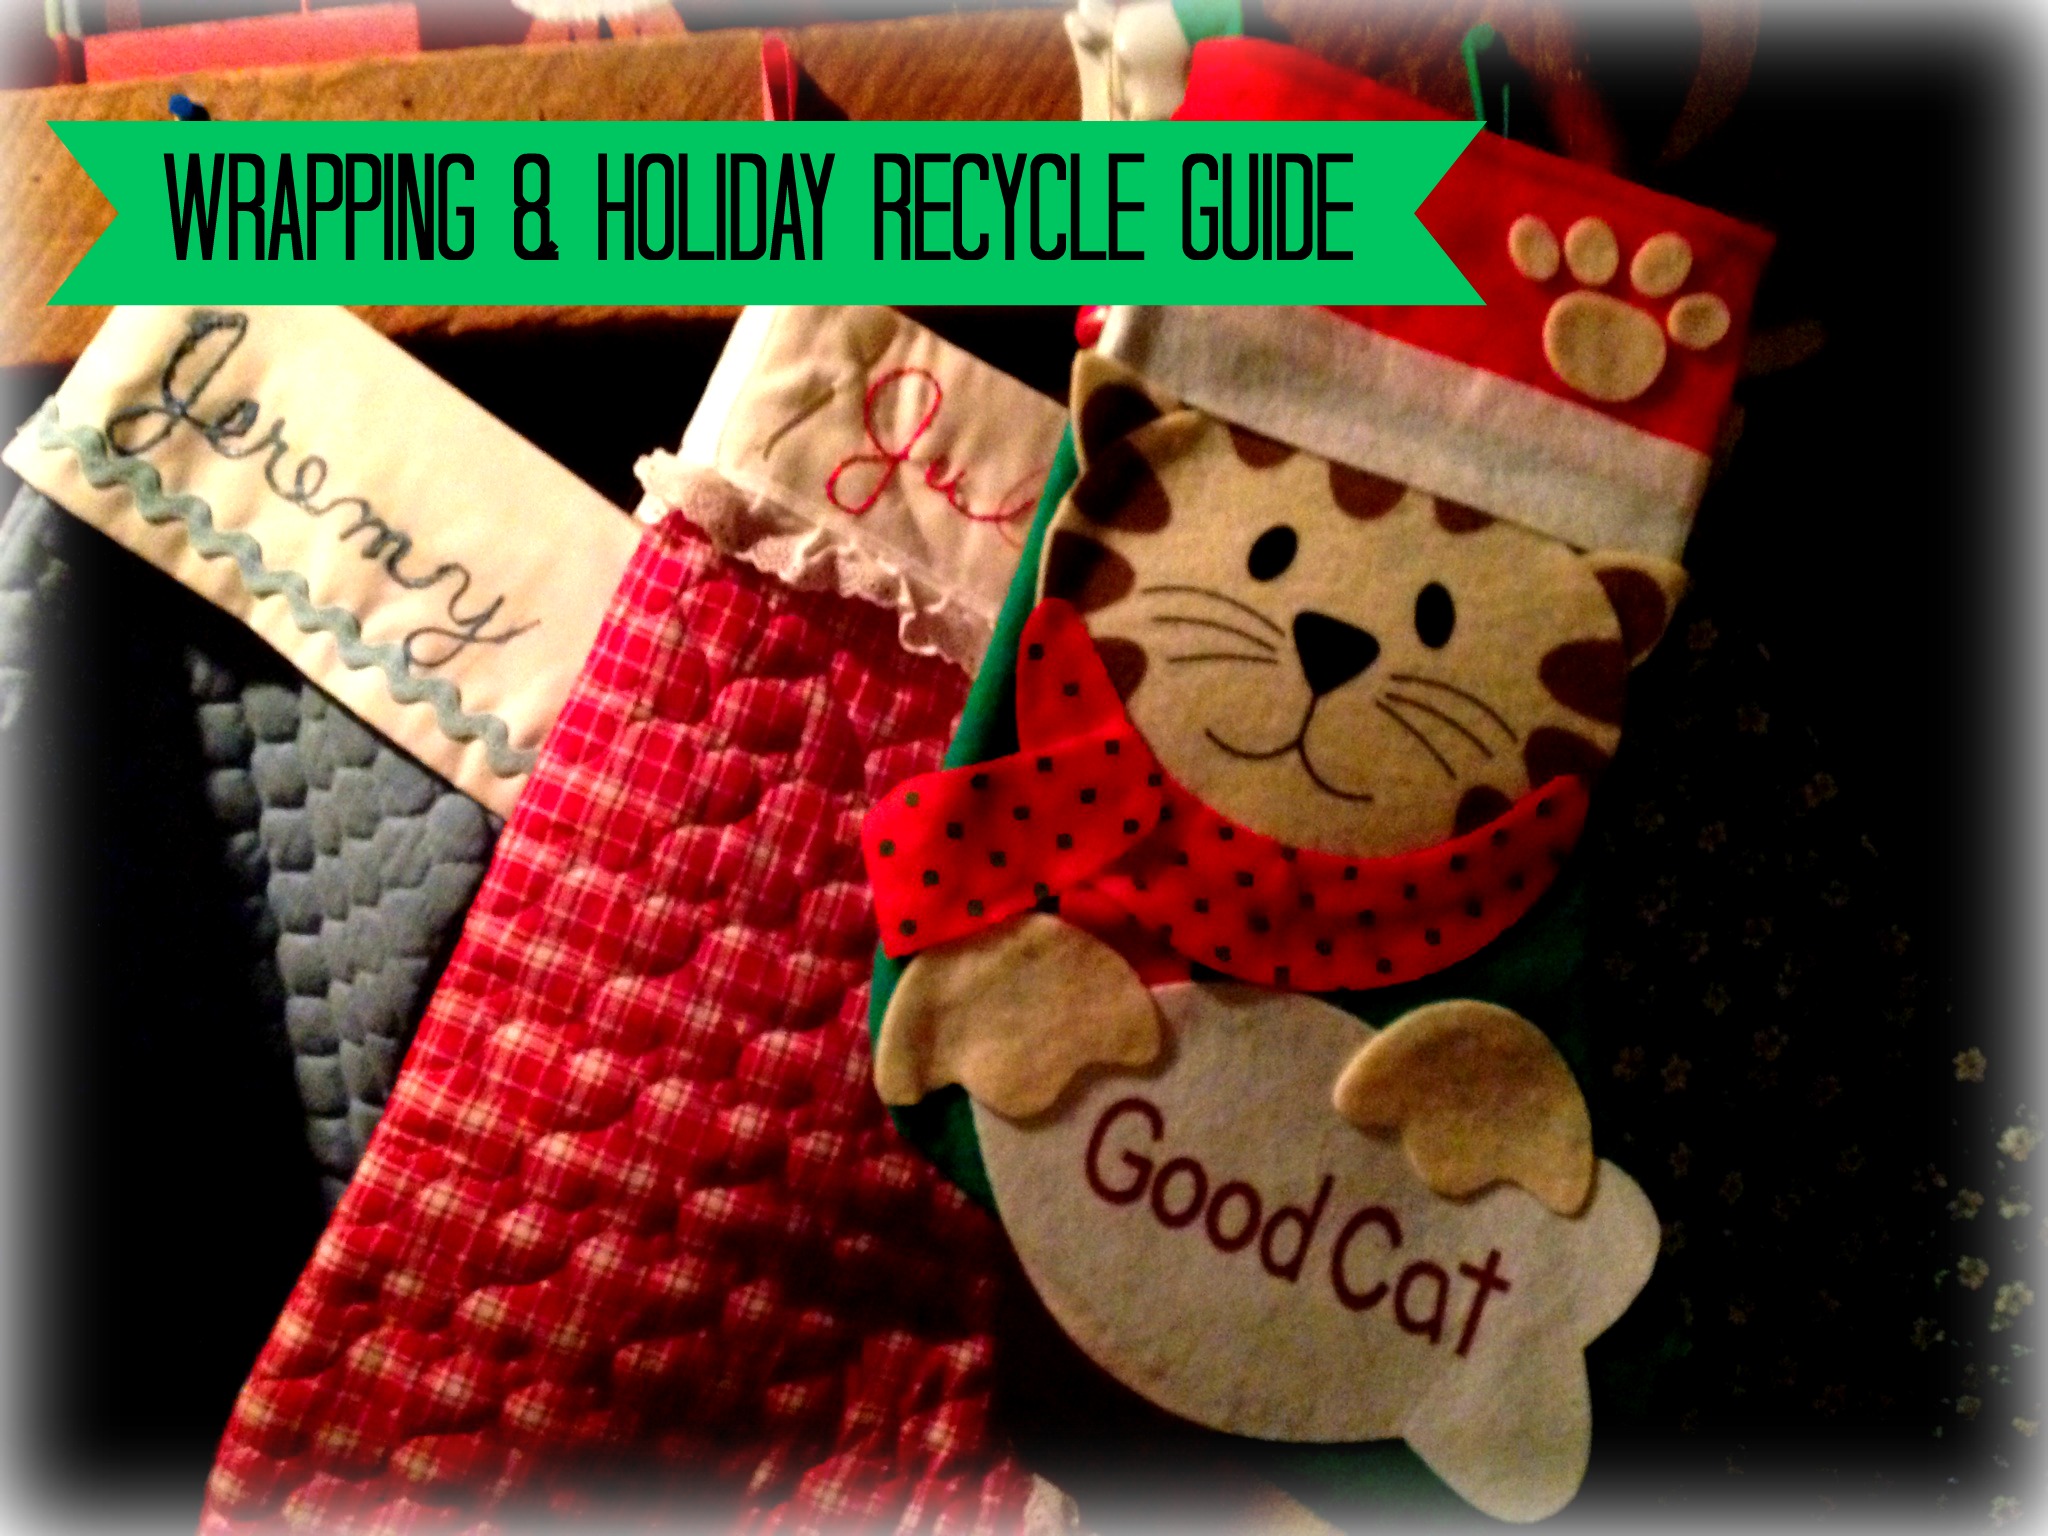 Christmas Recycling Tips: Wrappings, parties & more (WCI Weds)